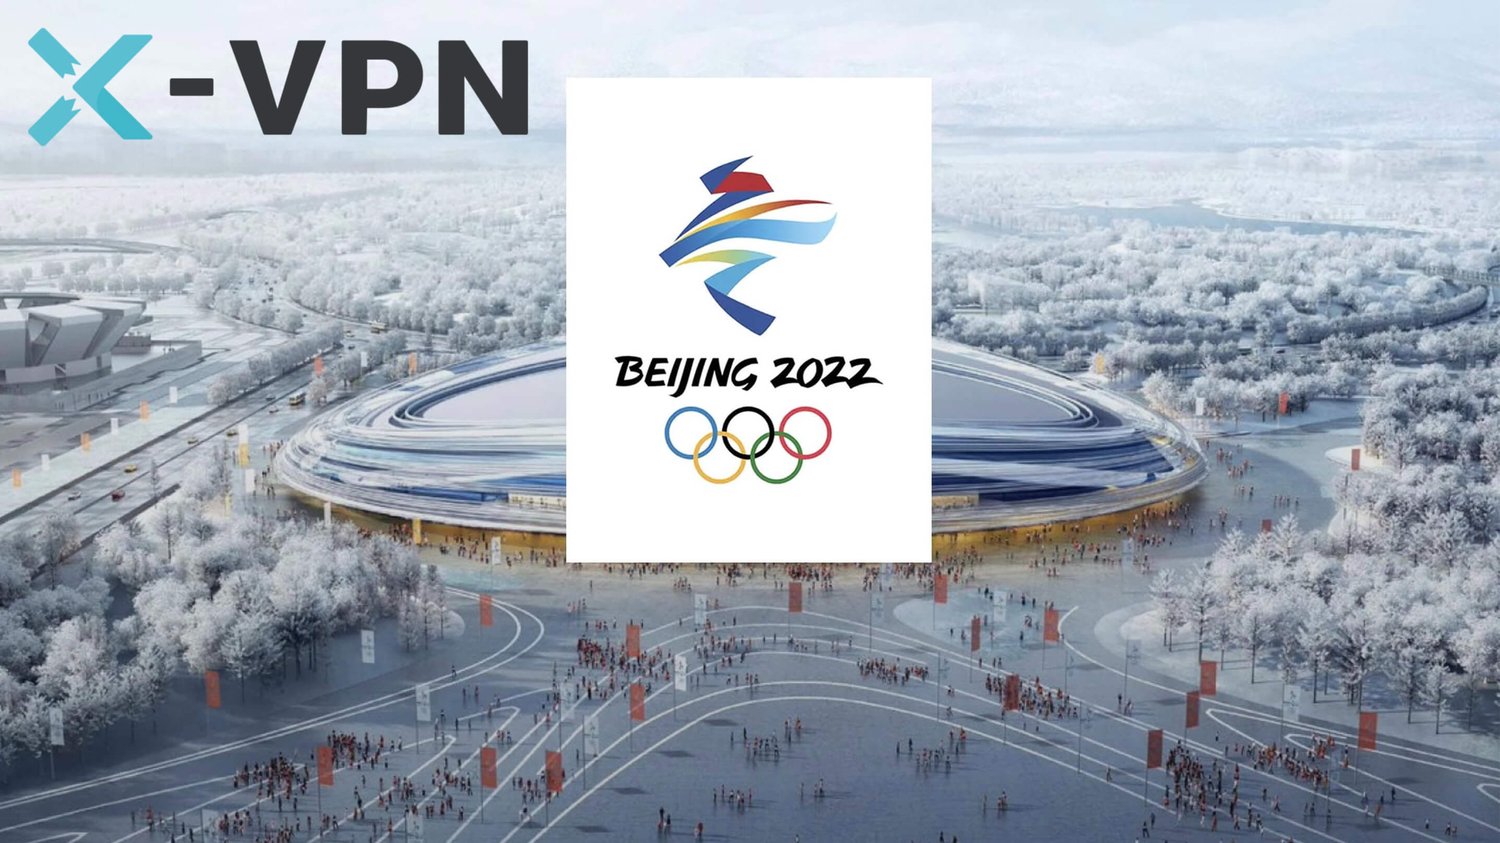 Guide to the upcoming finals in Beijing 2022 Olympics